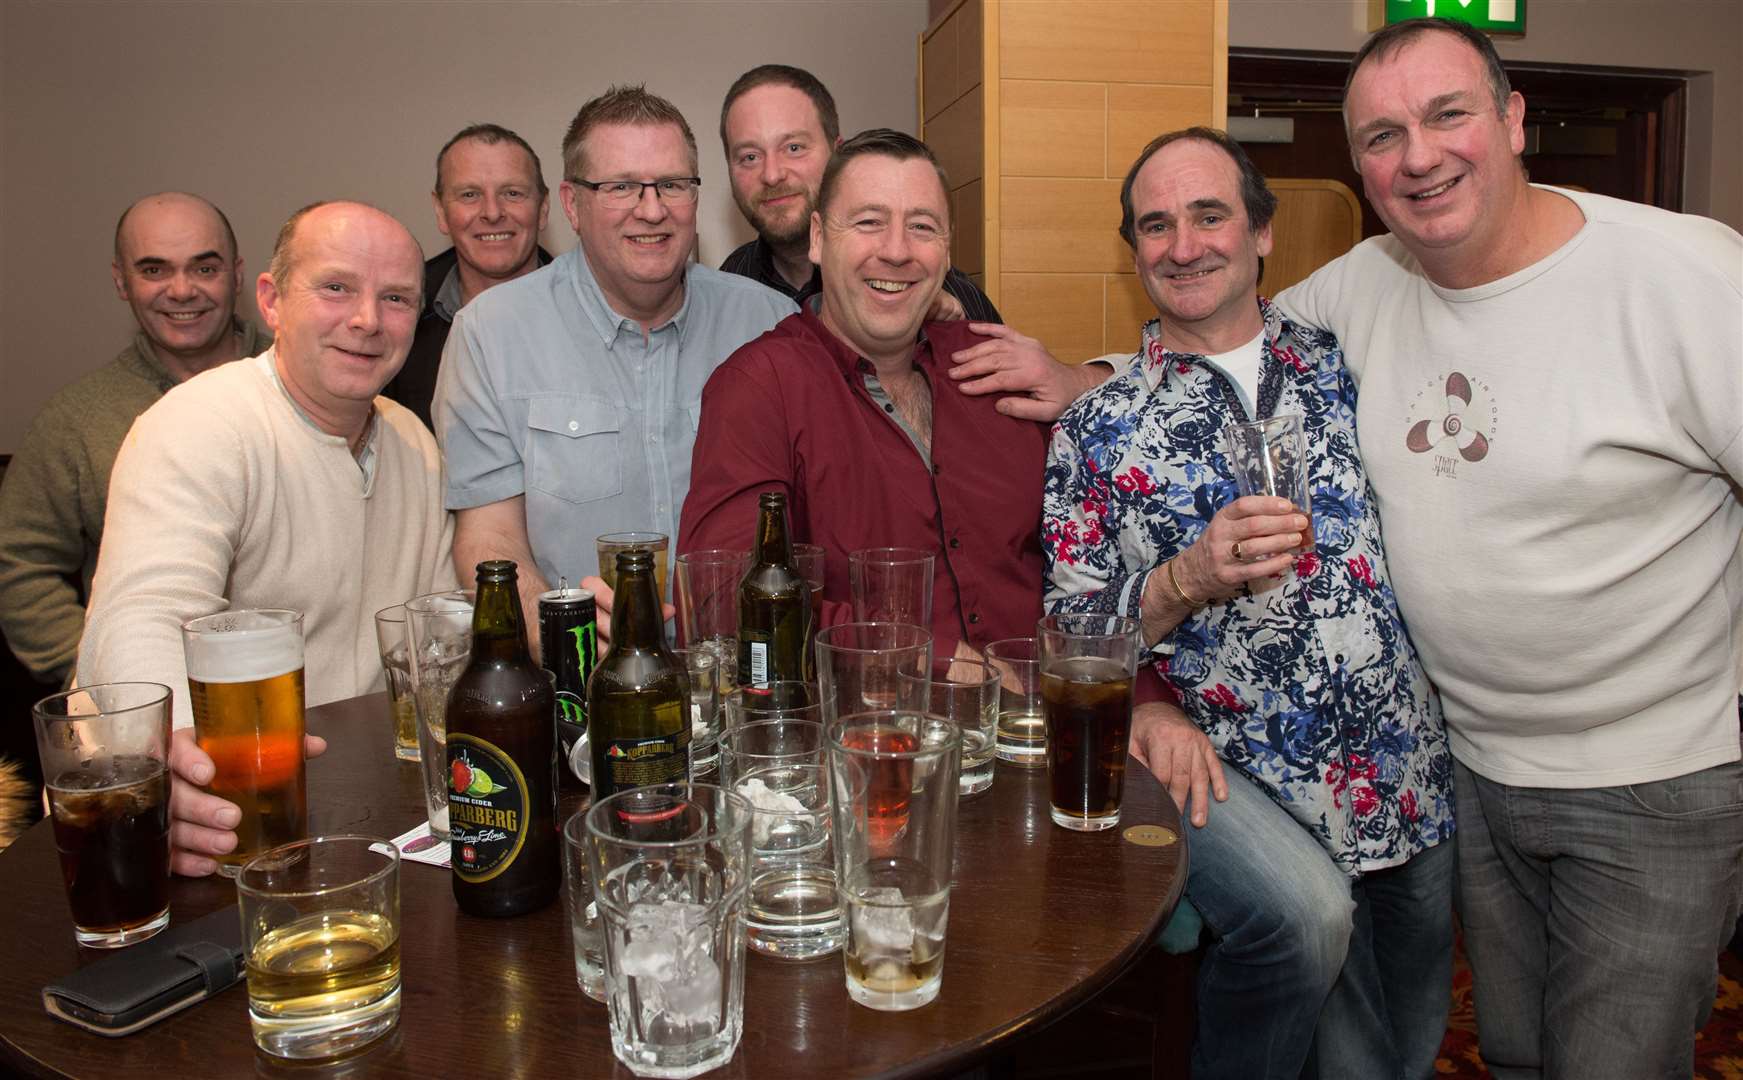 CitySeen 17JAN2015..Lads night out to celebrate Iain Riddle's (third right) 48th Birthday in The Kings Highway...Picture: Callum Mackay. Image No. 027861.